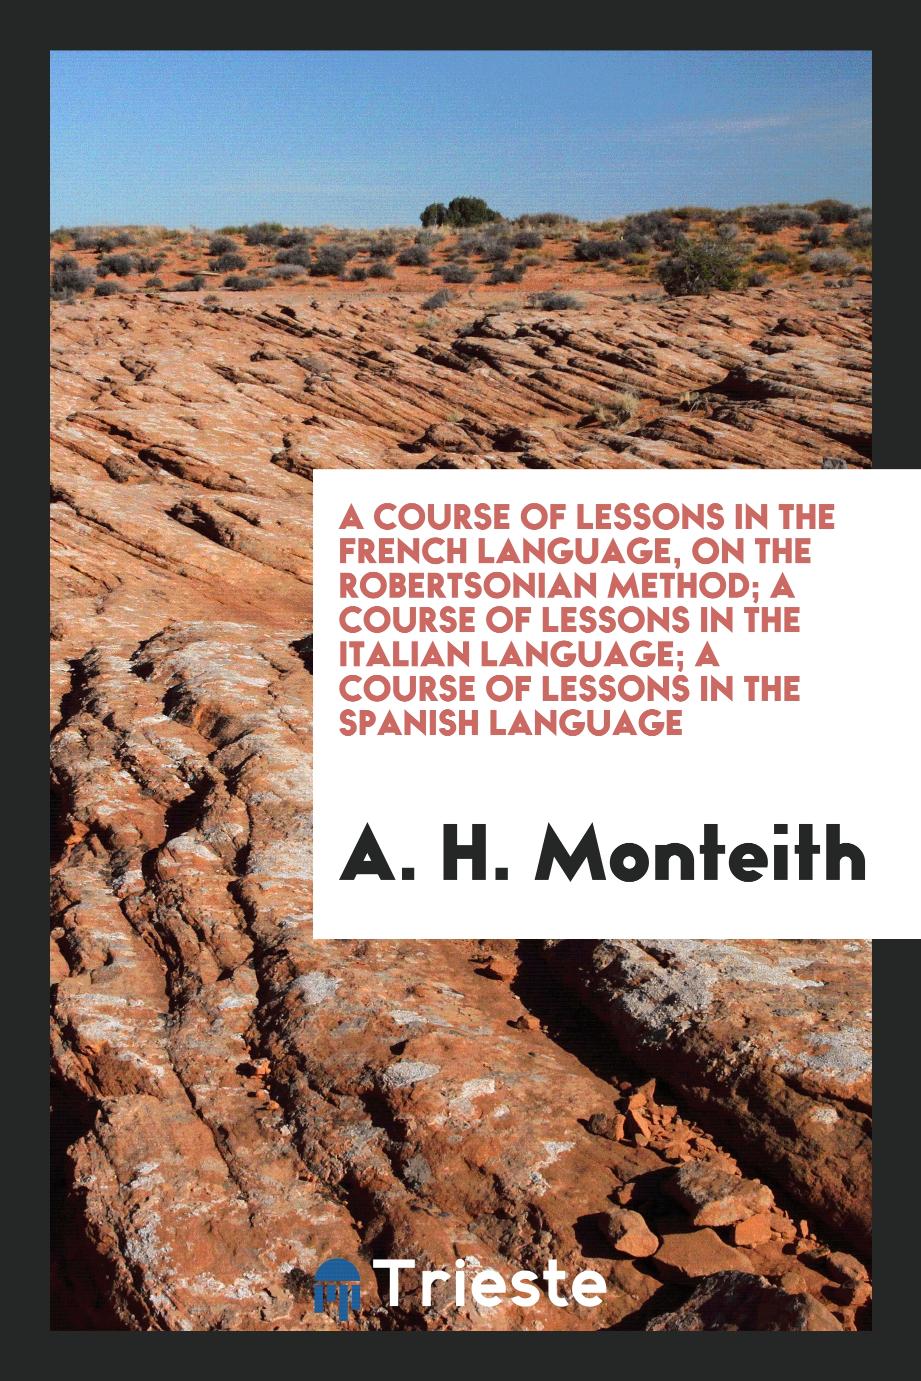 A Course of Lessons in the French Language, on the Robertsonian Method; A Course of Lessons in the Italian Language; A Course of Lessons in the Spanish Language